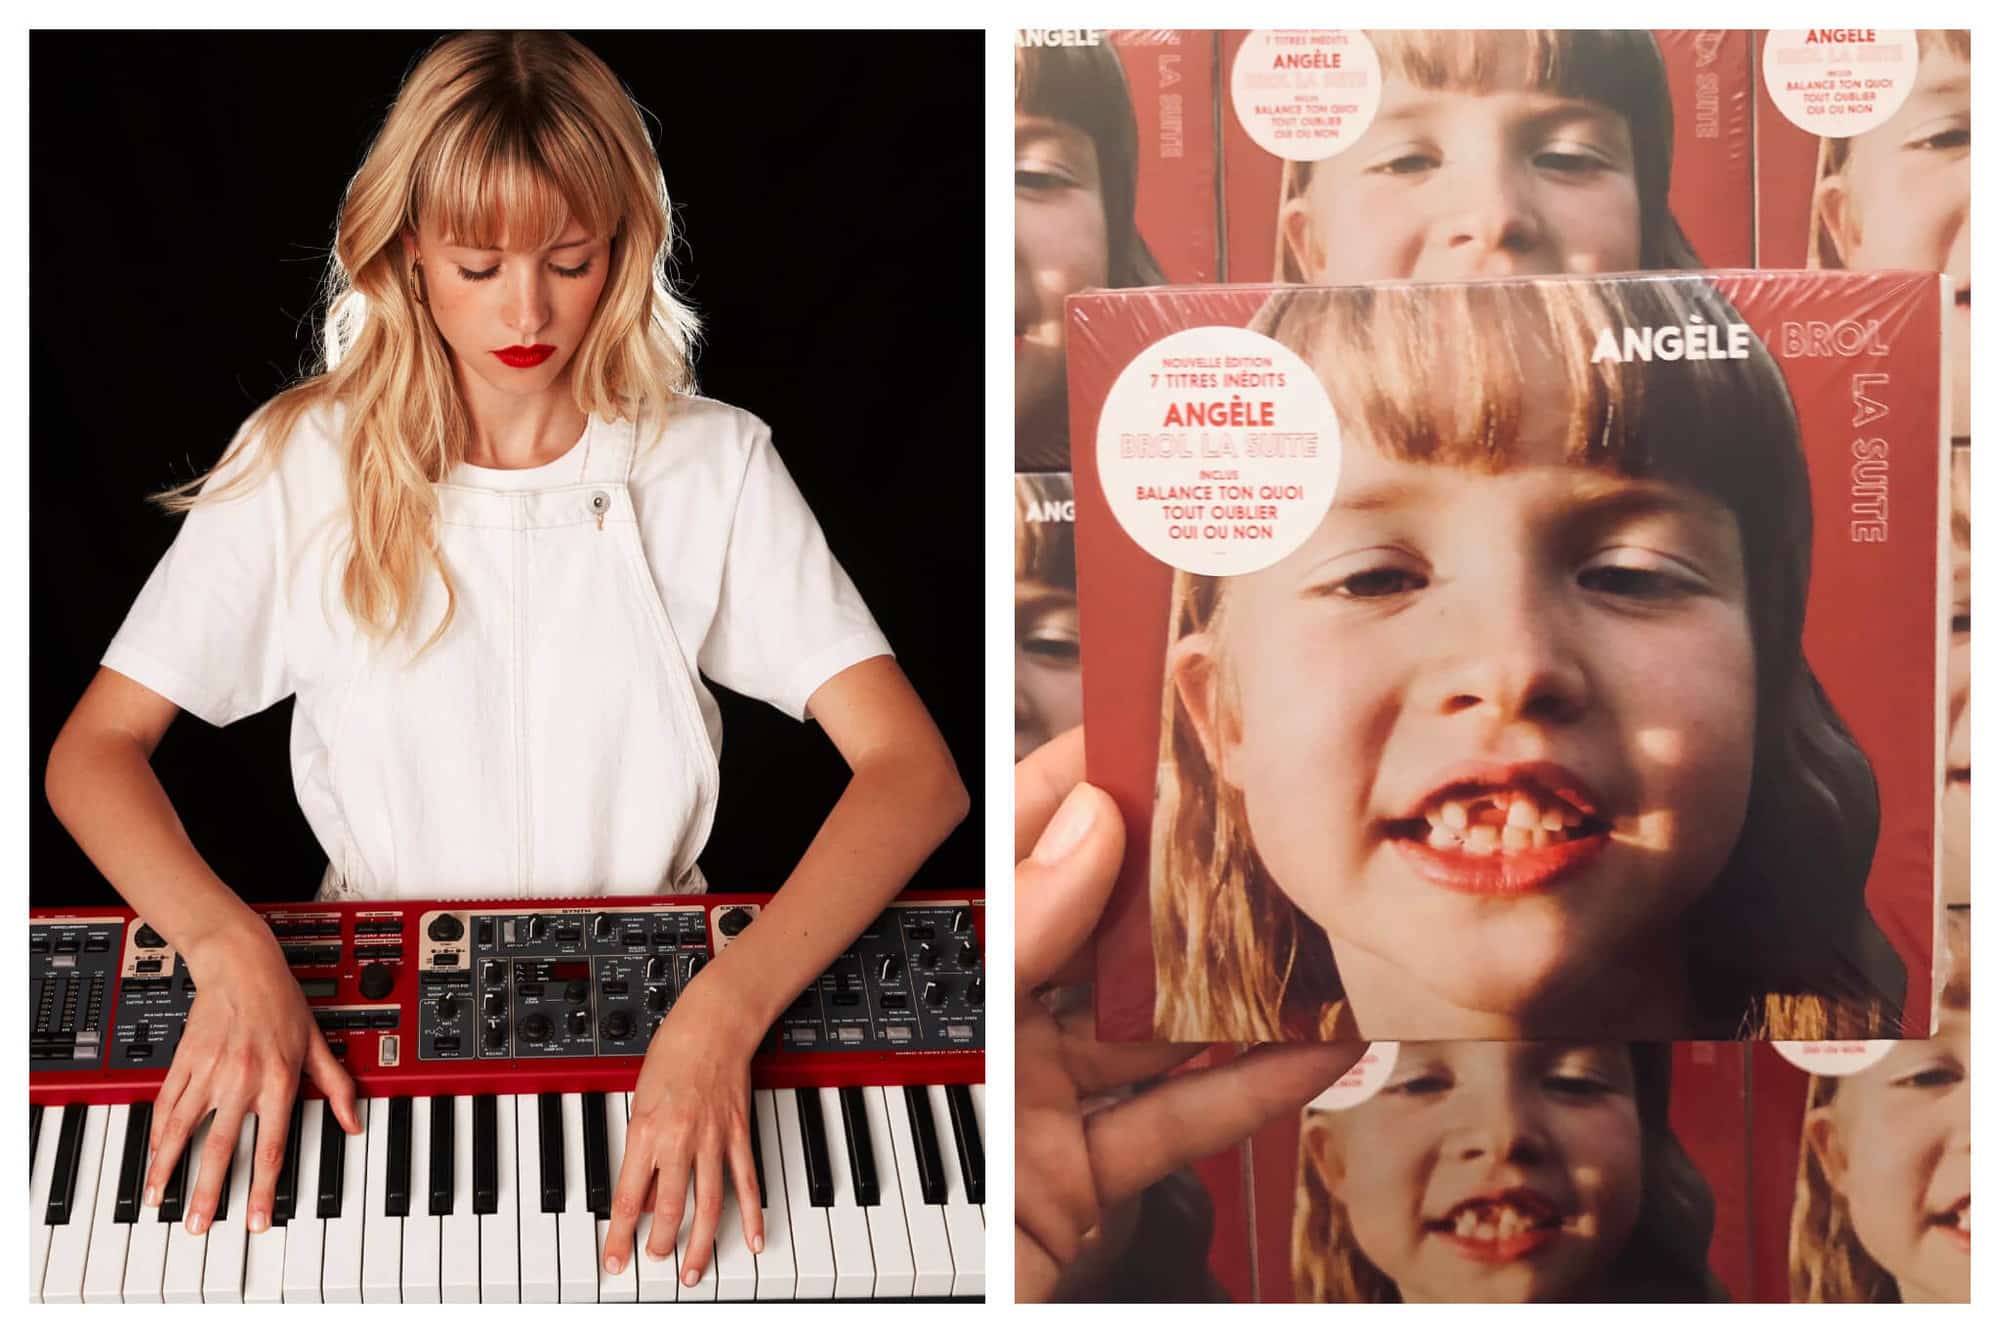 Left: Angèle standing behind a piano keyboard, with her fingers on the keys. Right: Angèle's album cover.